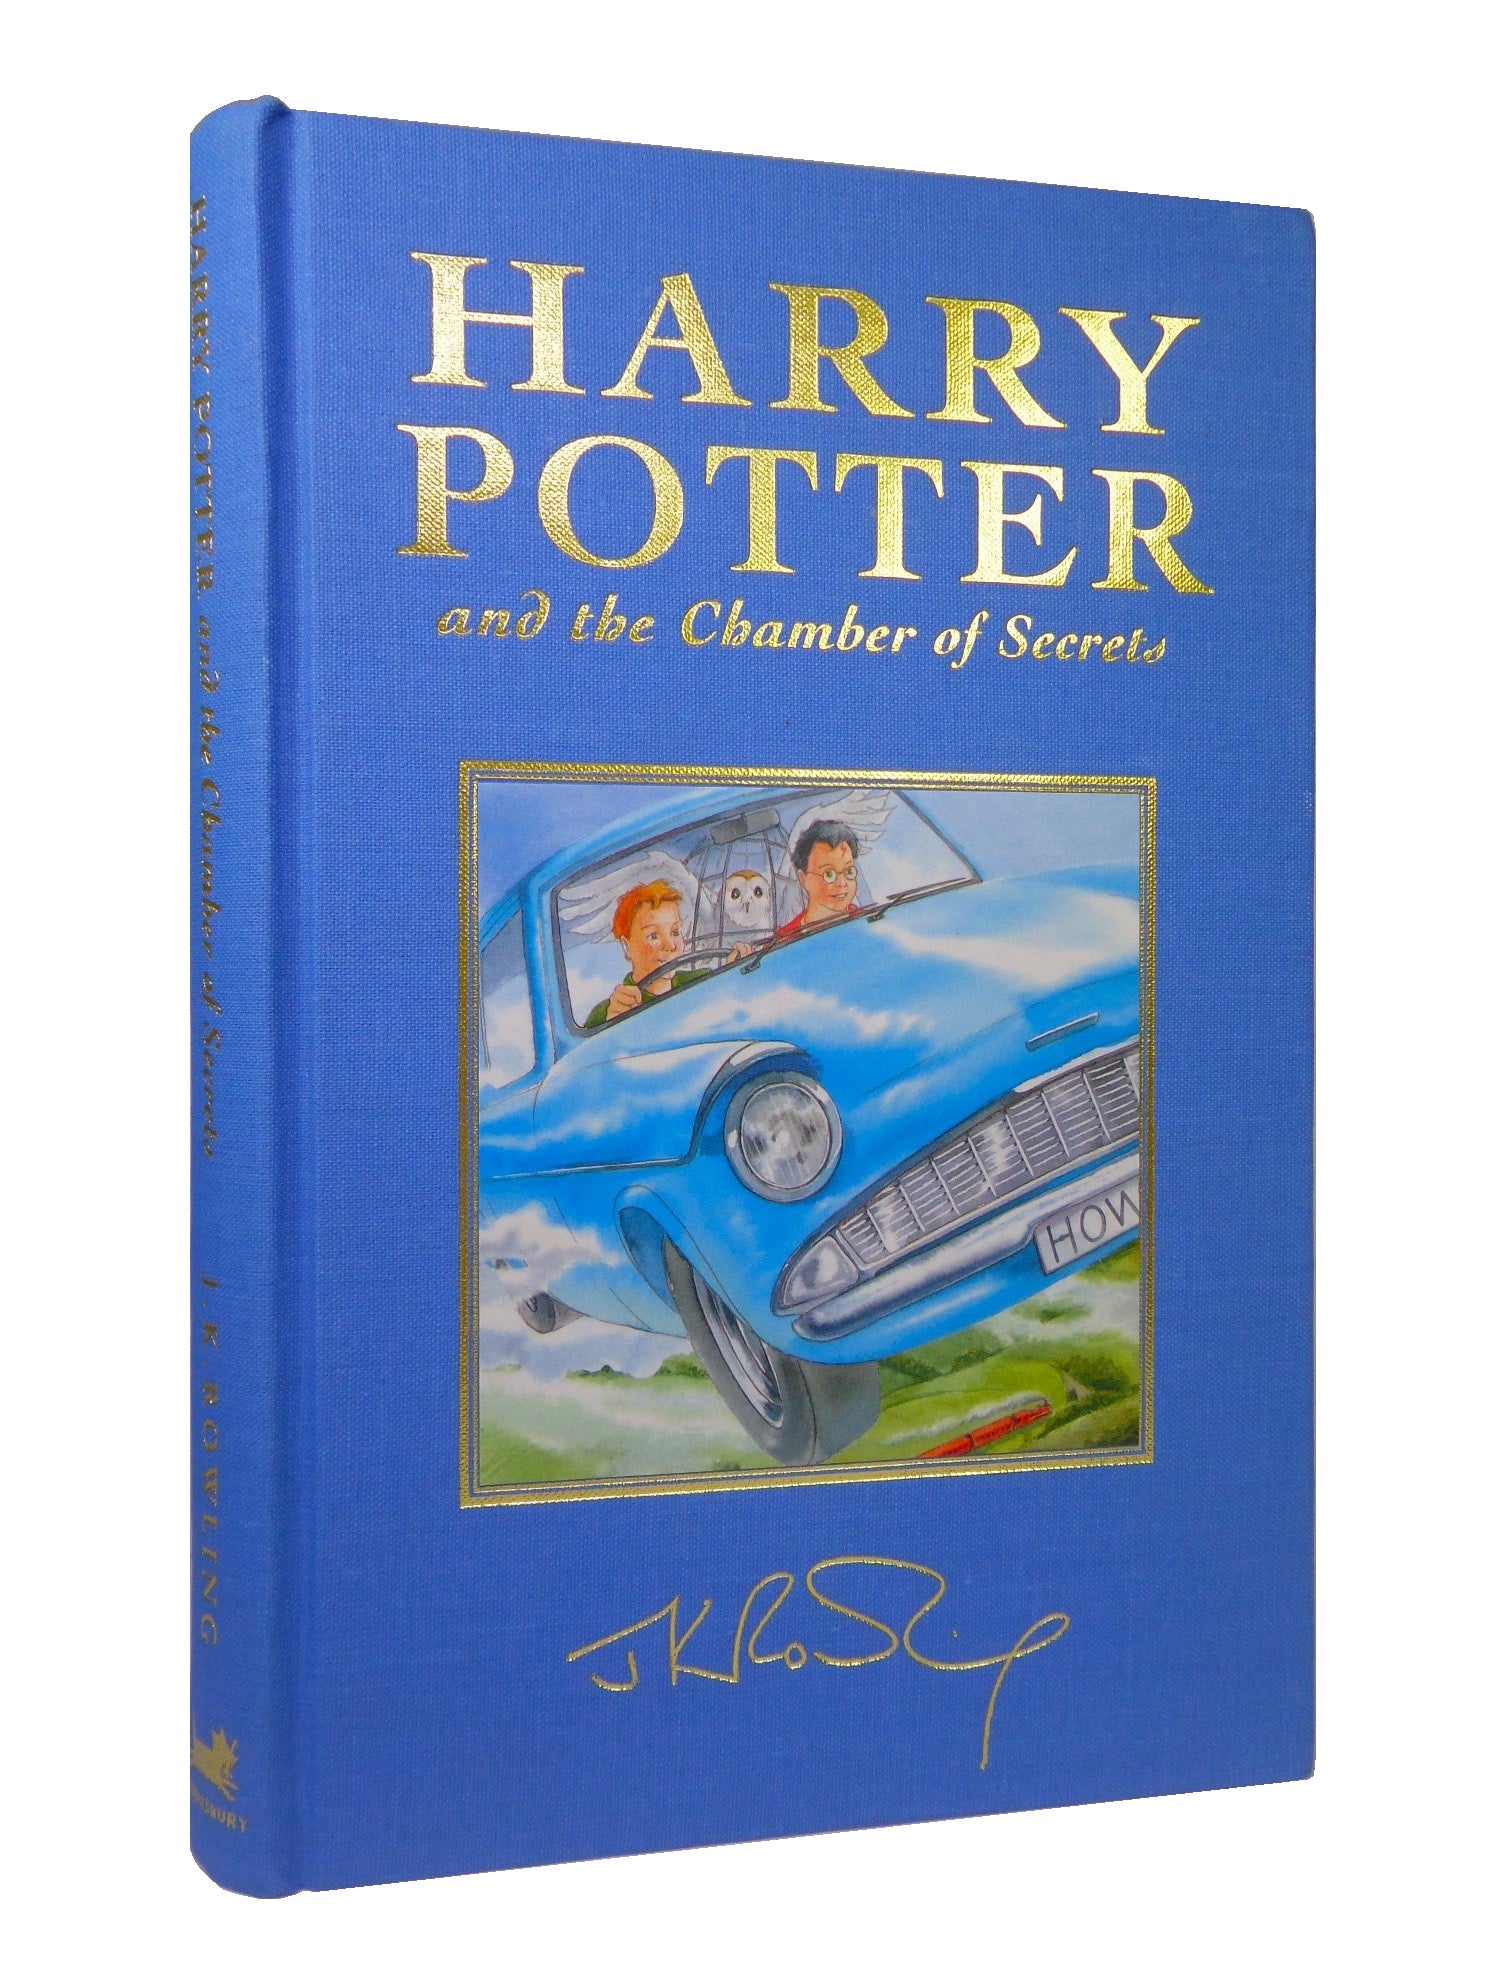 HARRY POTTER AND THE CHAMBER OF SECRETS BY J.K. ROWLING 1999 FIRST DELUXE EDITION